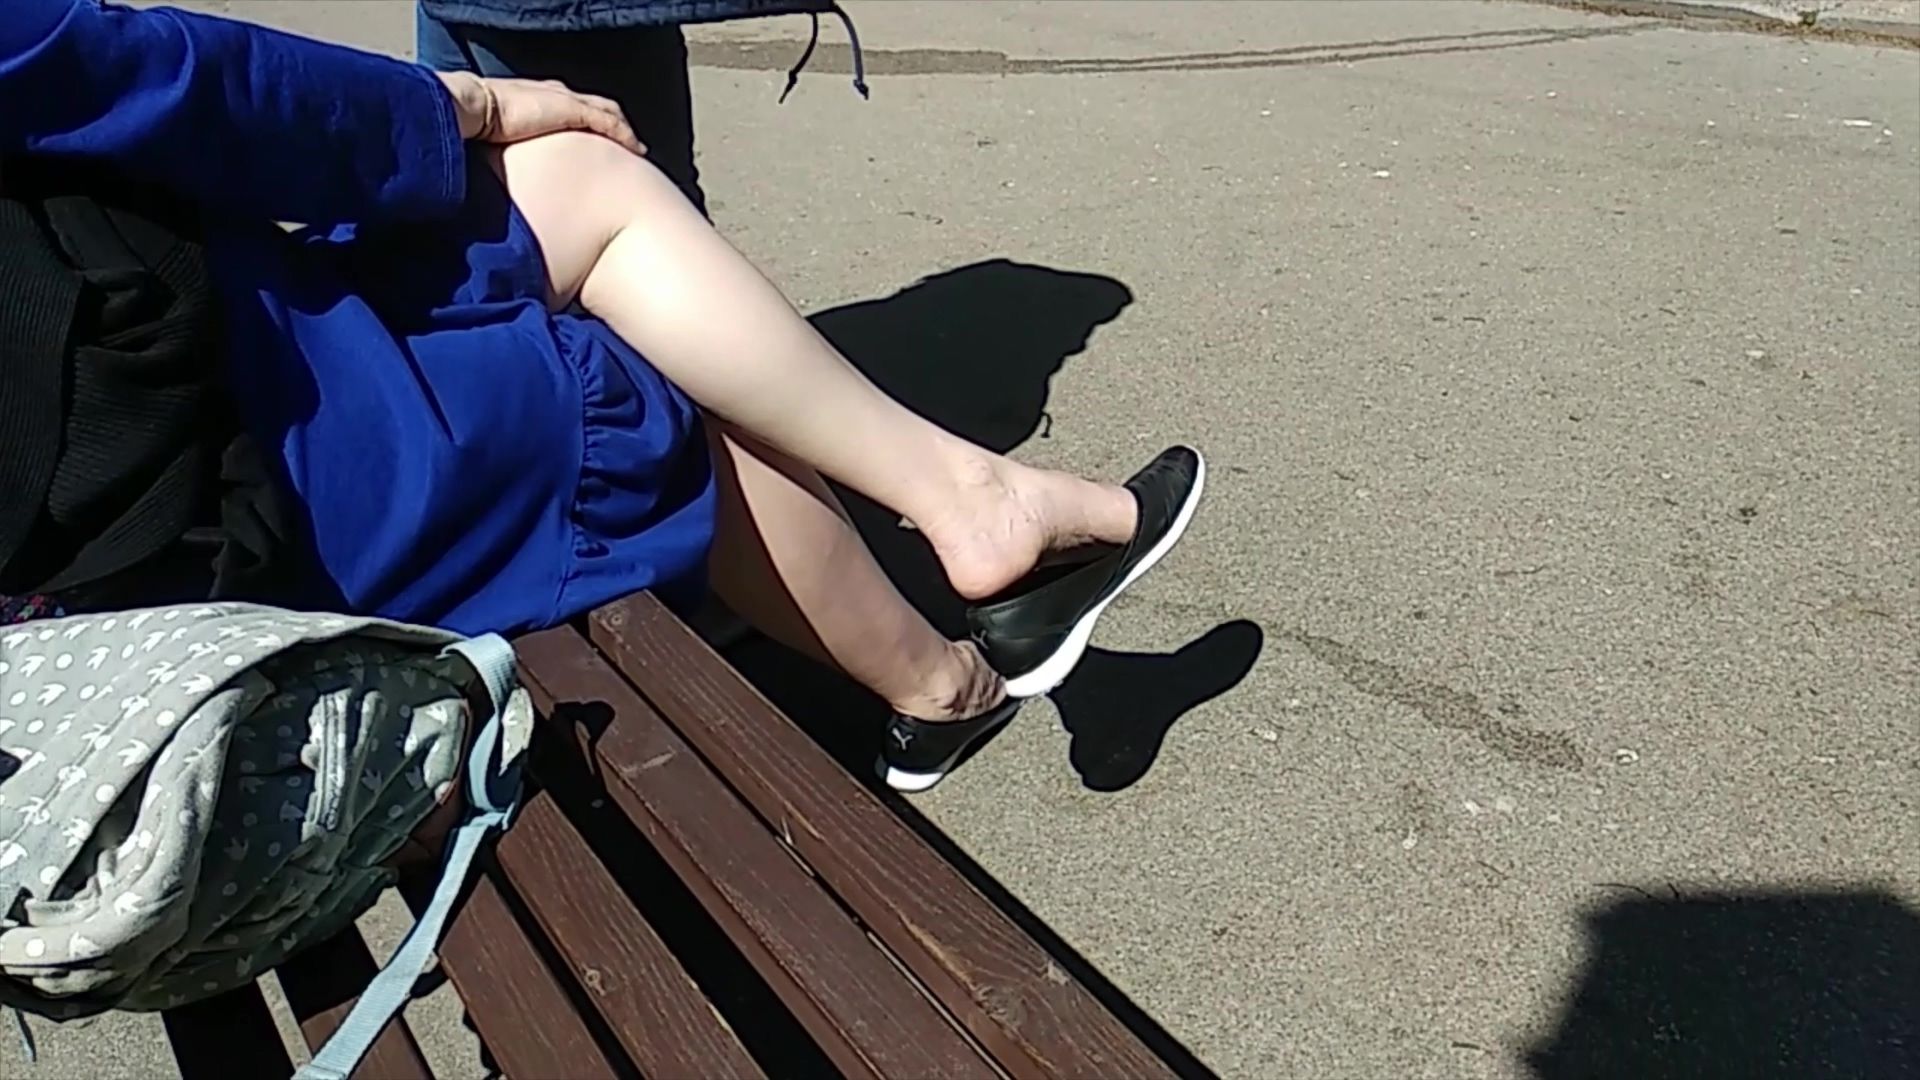 Small Amateur Girl Gets Filmed Dangling Her Flat Shoes In Public Twink - 1